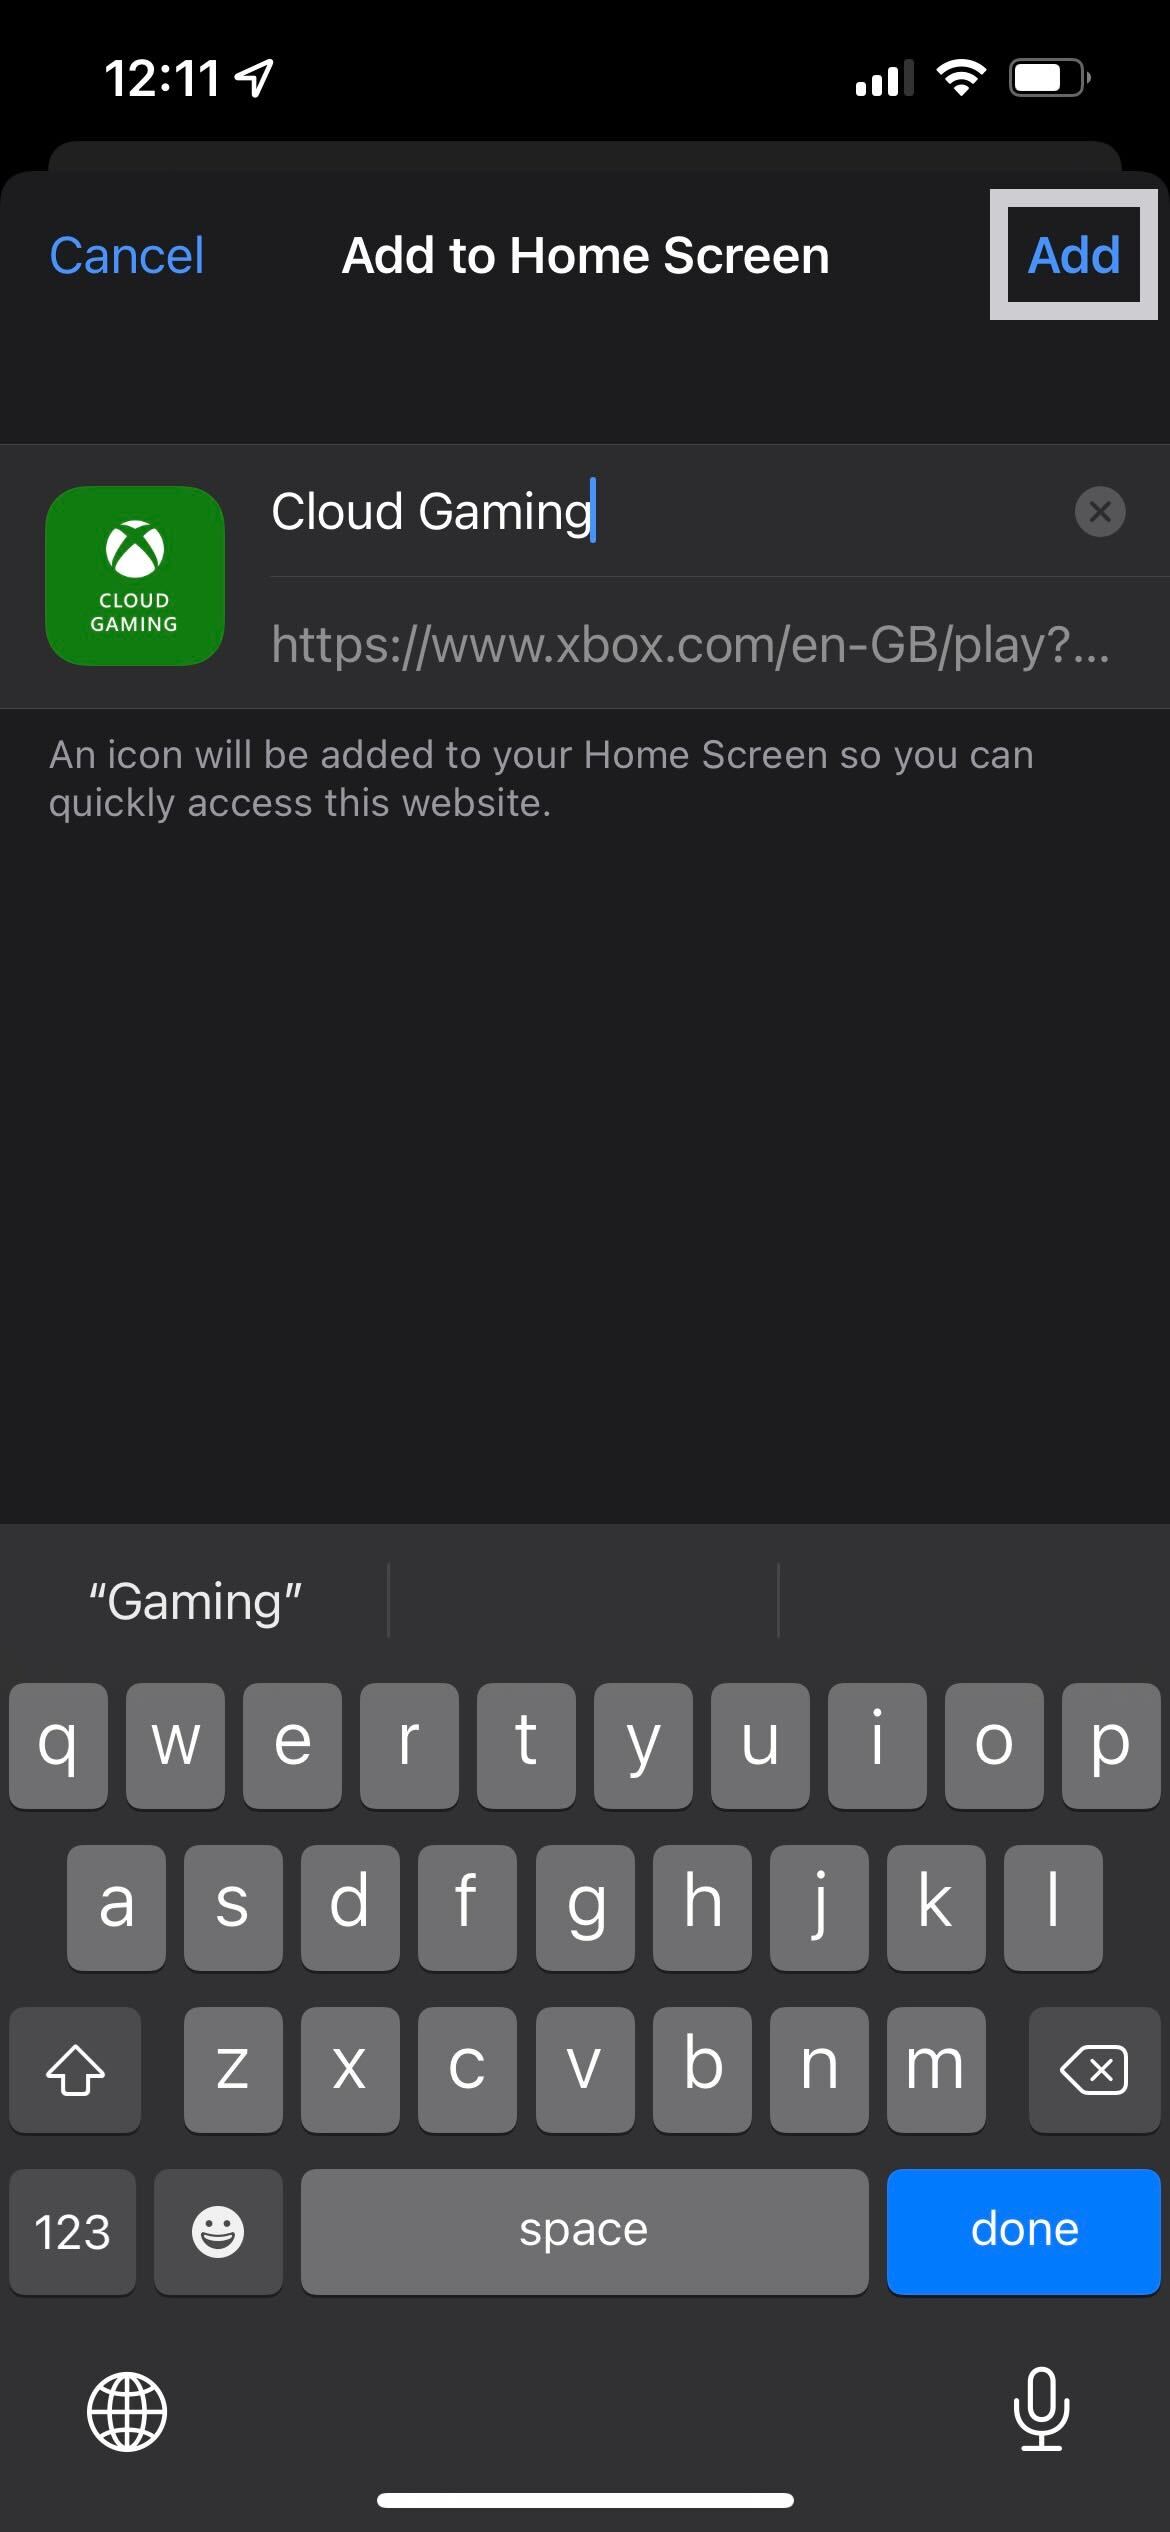 The new xbox webpage app in iOS